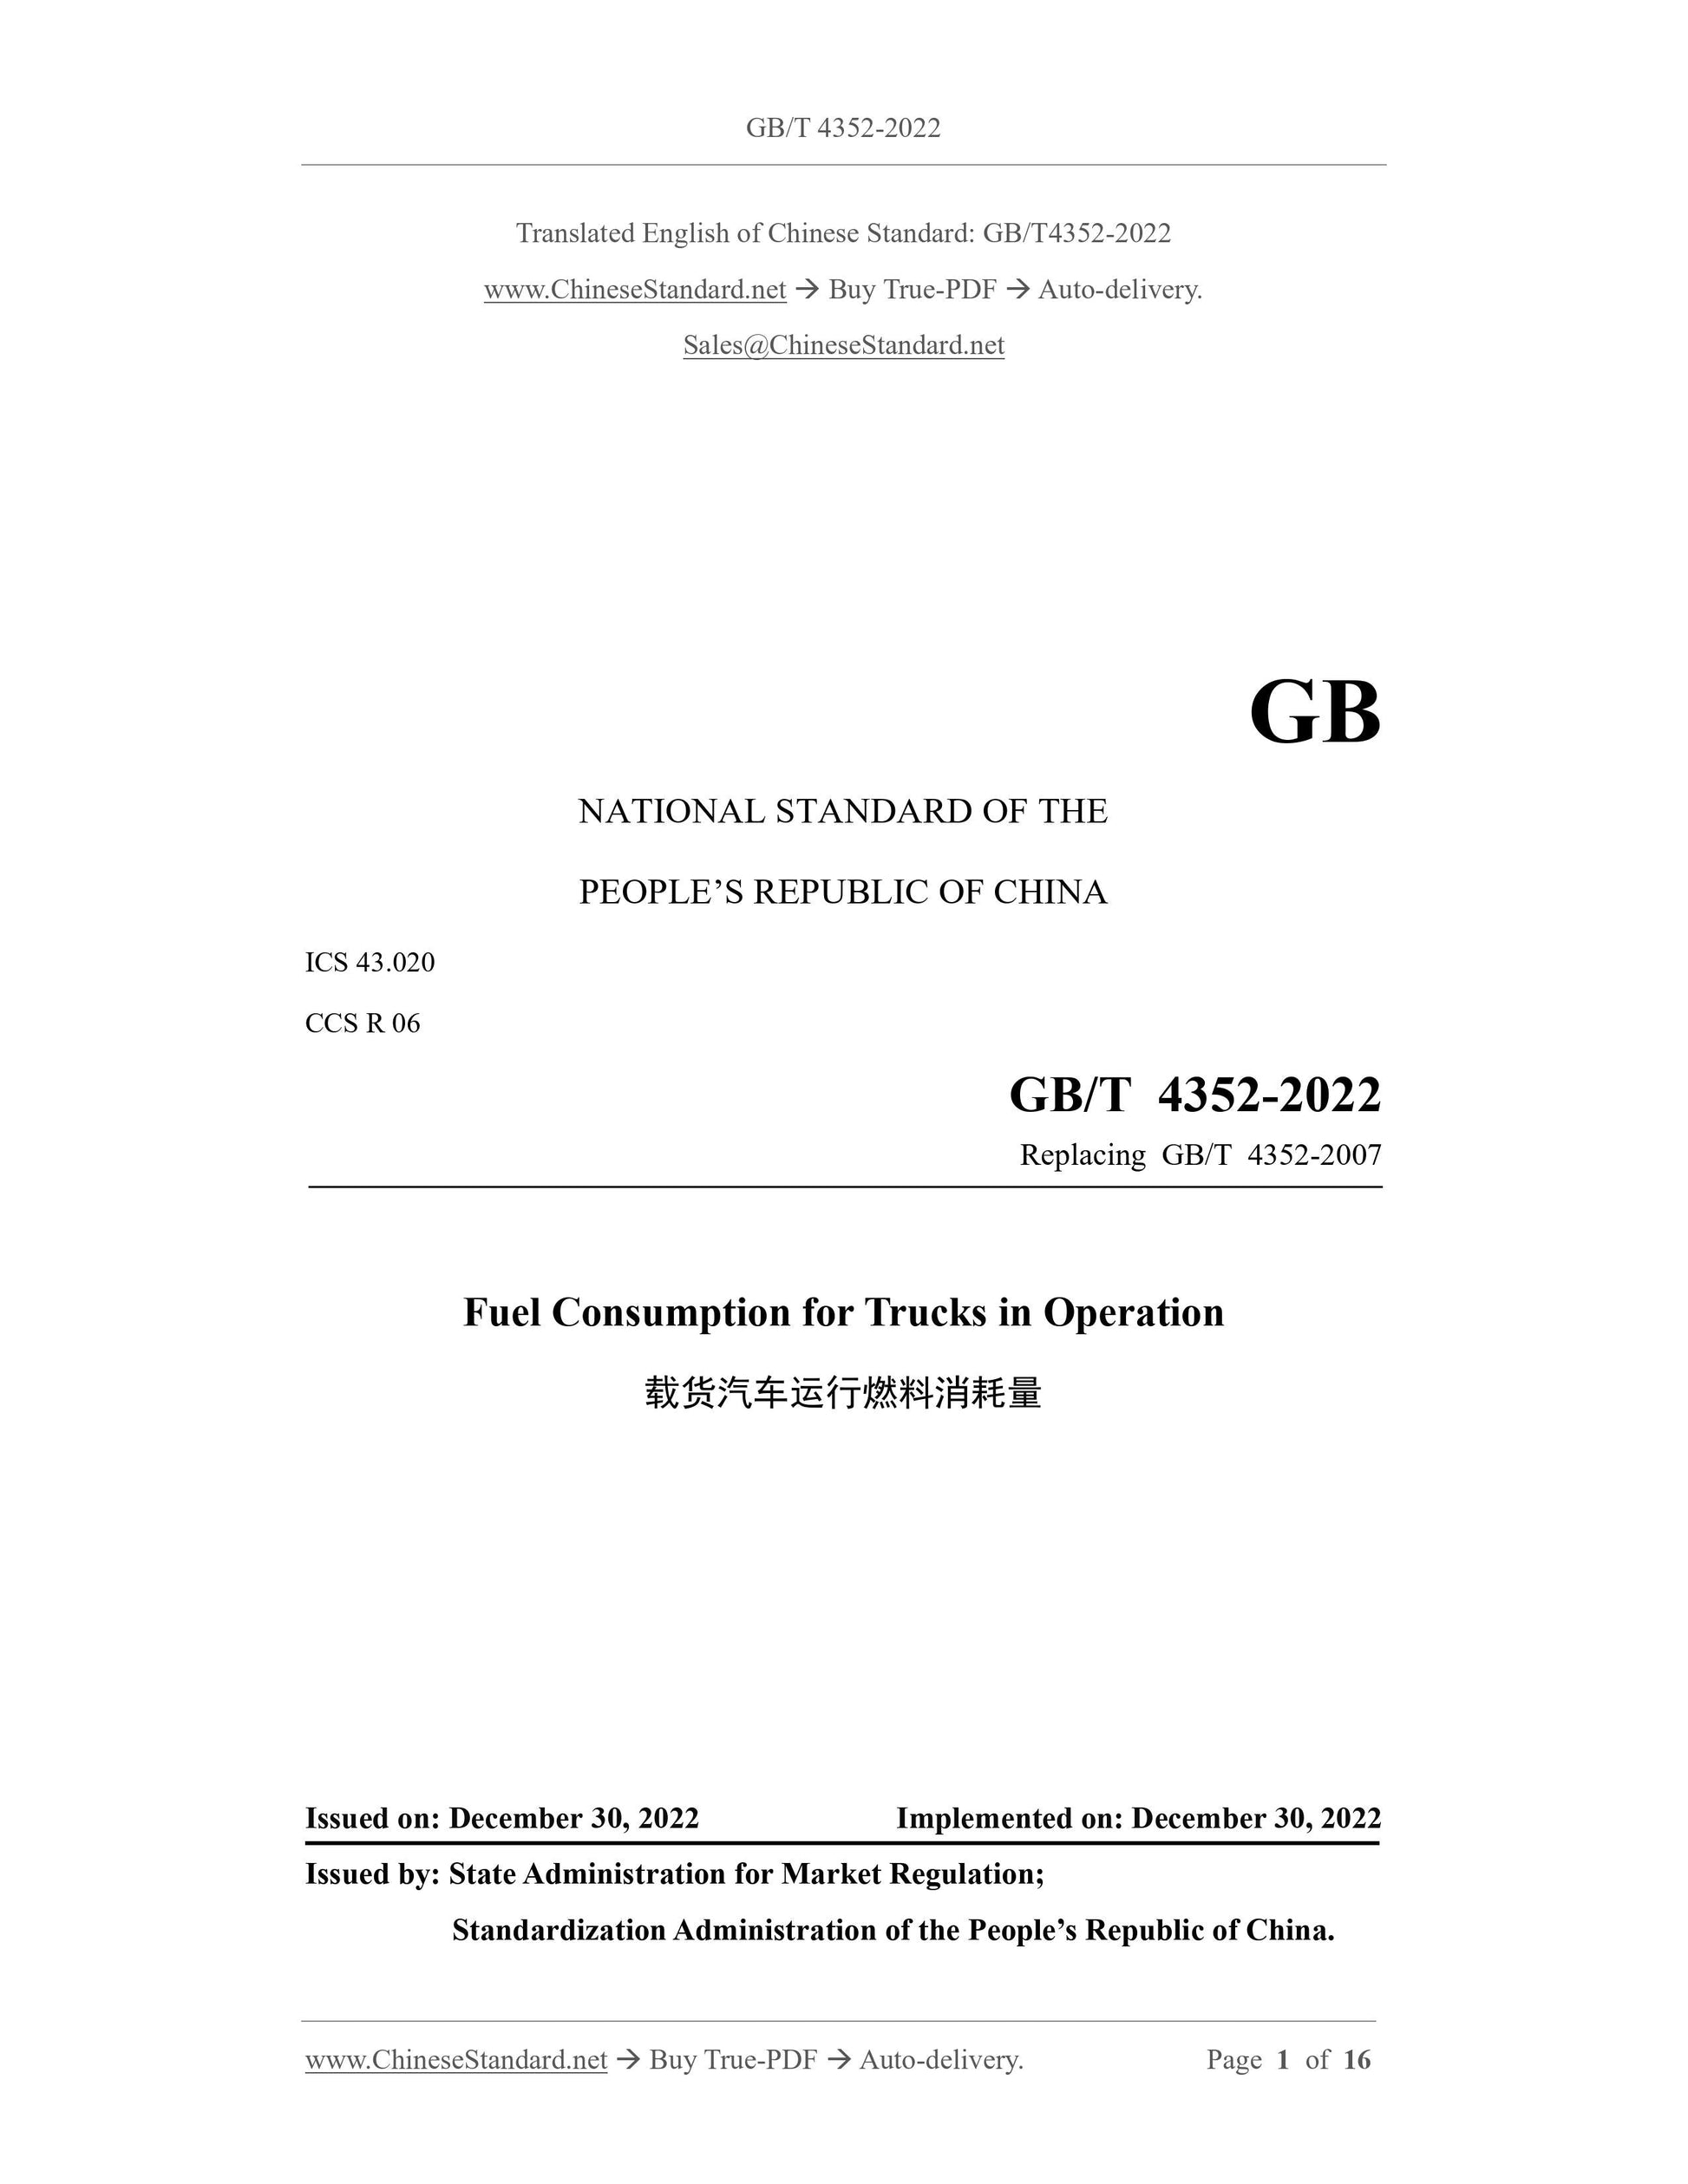 GB/T 4352-2022 Page 1